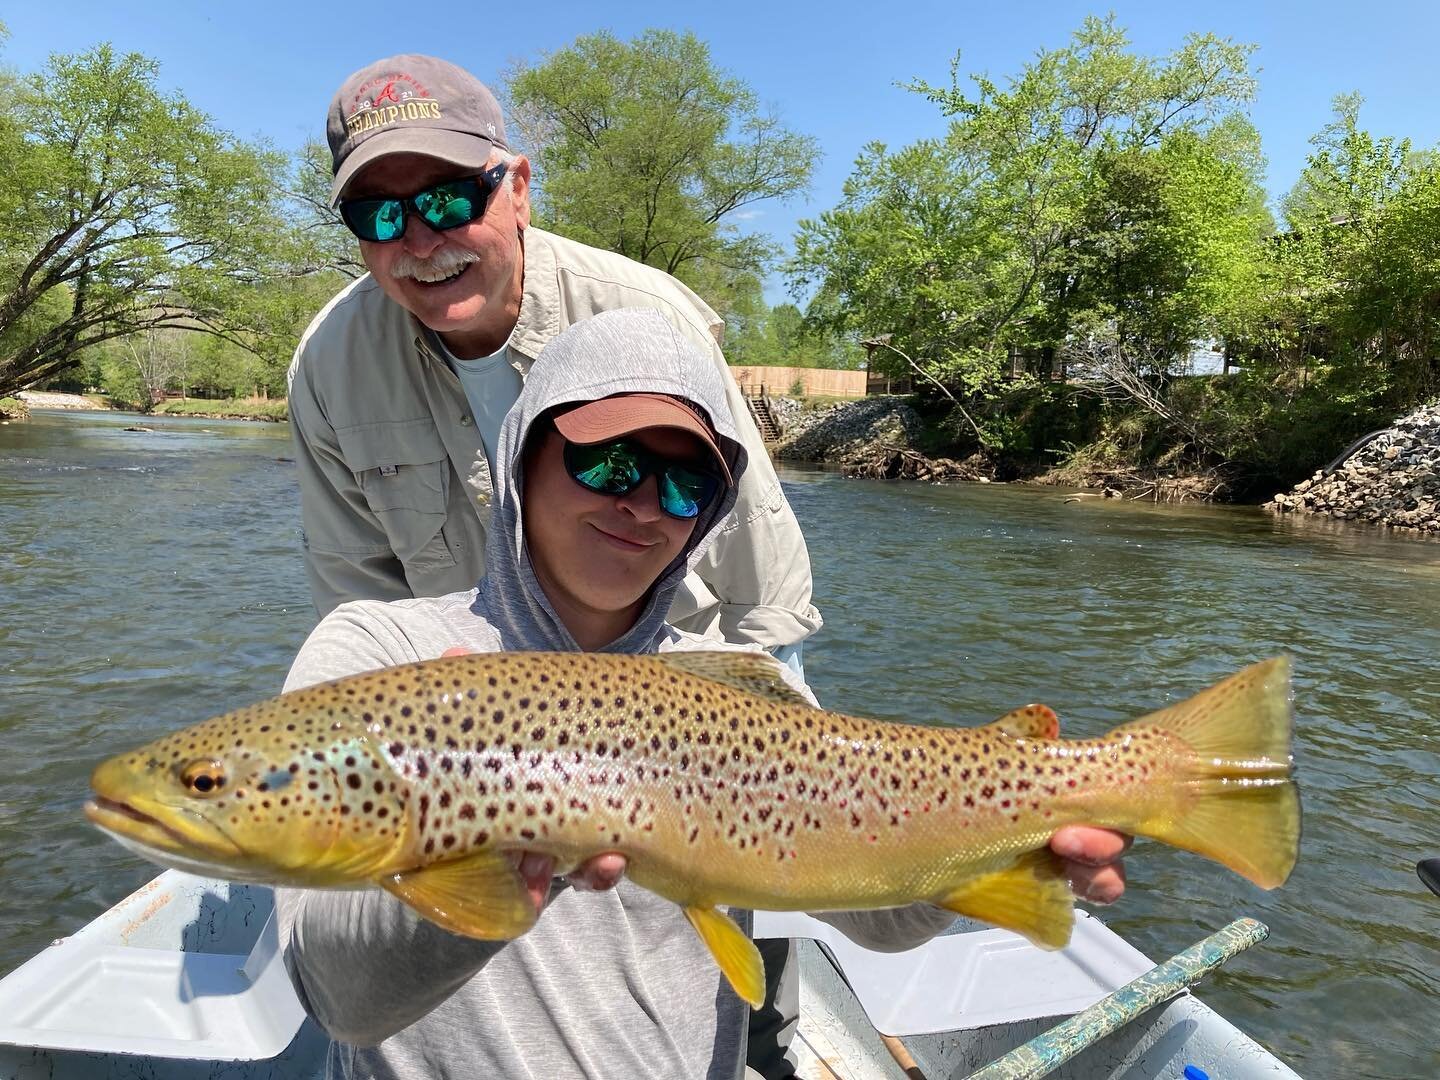 The fishing lately has been lights out pretty much all over the last little bit, and we&rsquo;ve been seeing tons of great fish hit the net, but this Big Toccoa Brown from guide @peytonmcclure118 boat Thursday is a tough one to top! We Love those big